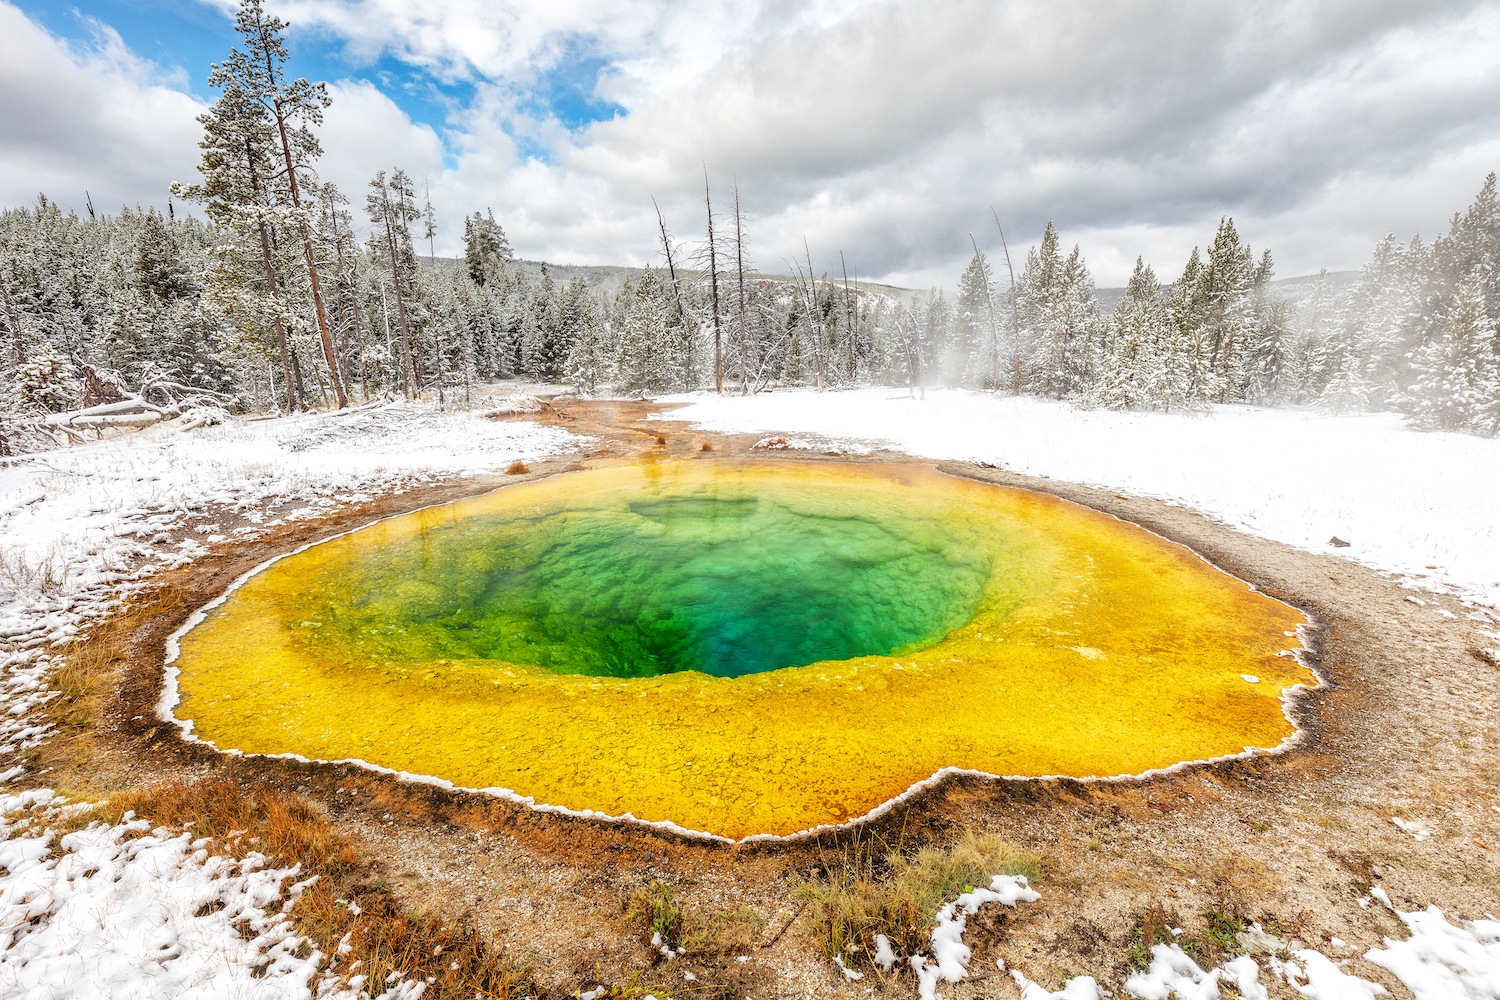 Report Predicts Drastic Change In Yellowstone National Park's Climate - National Parks Traveler